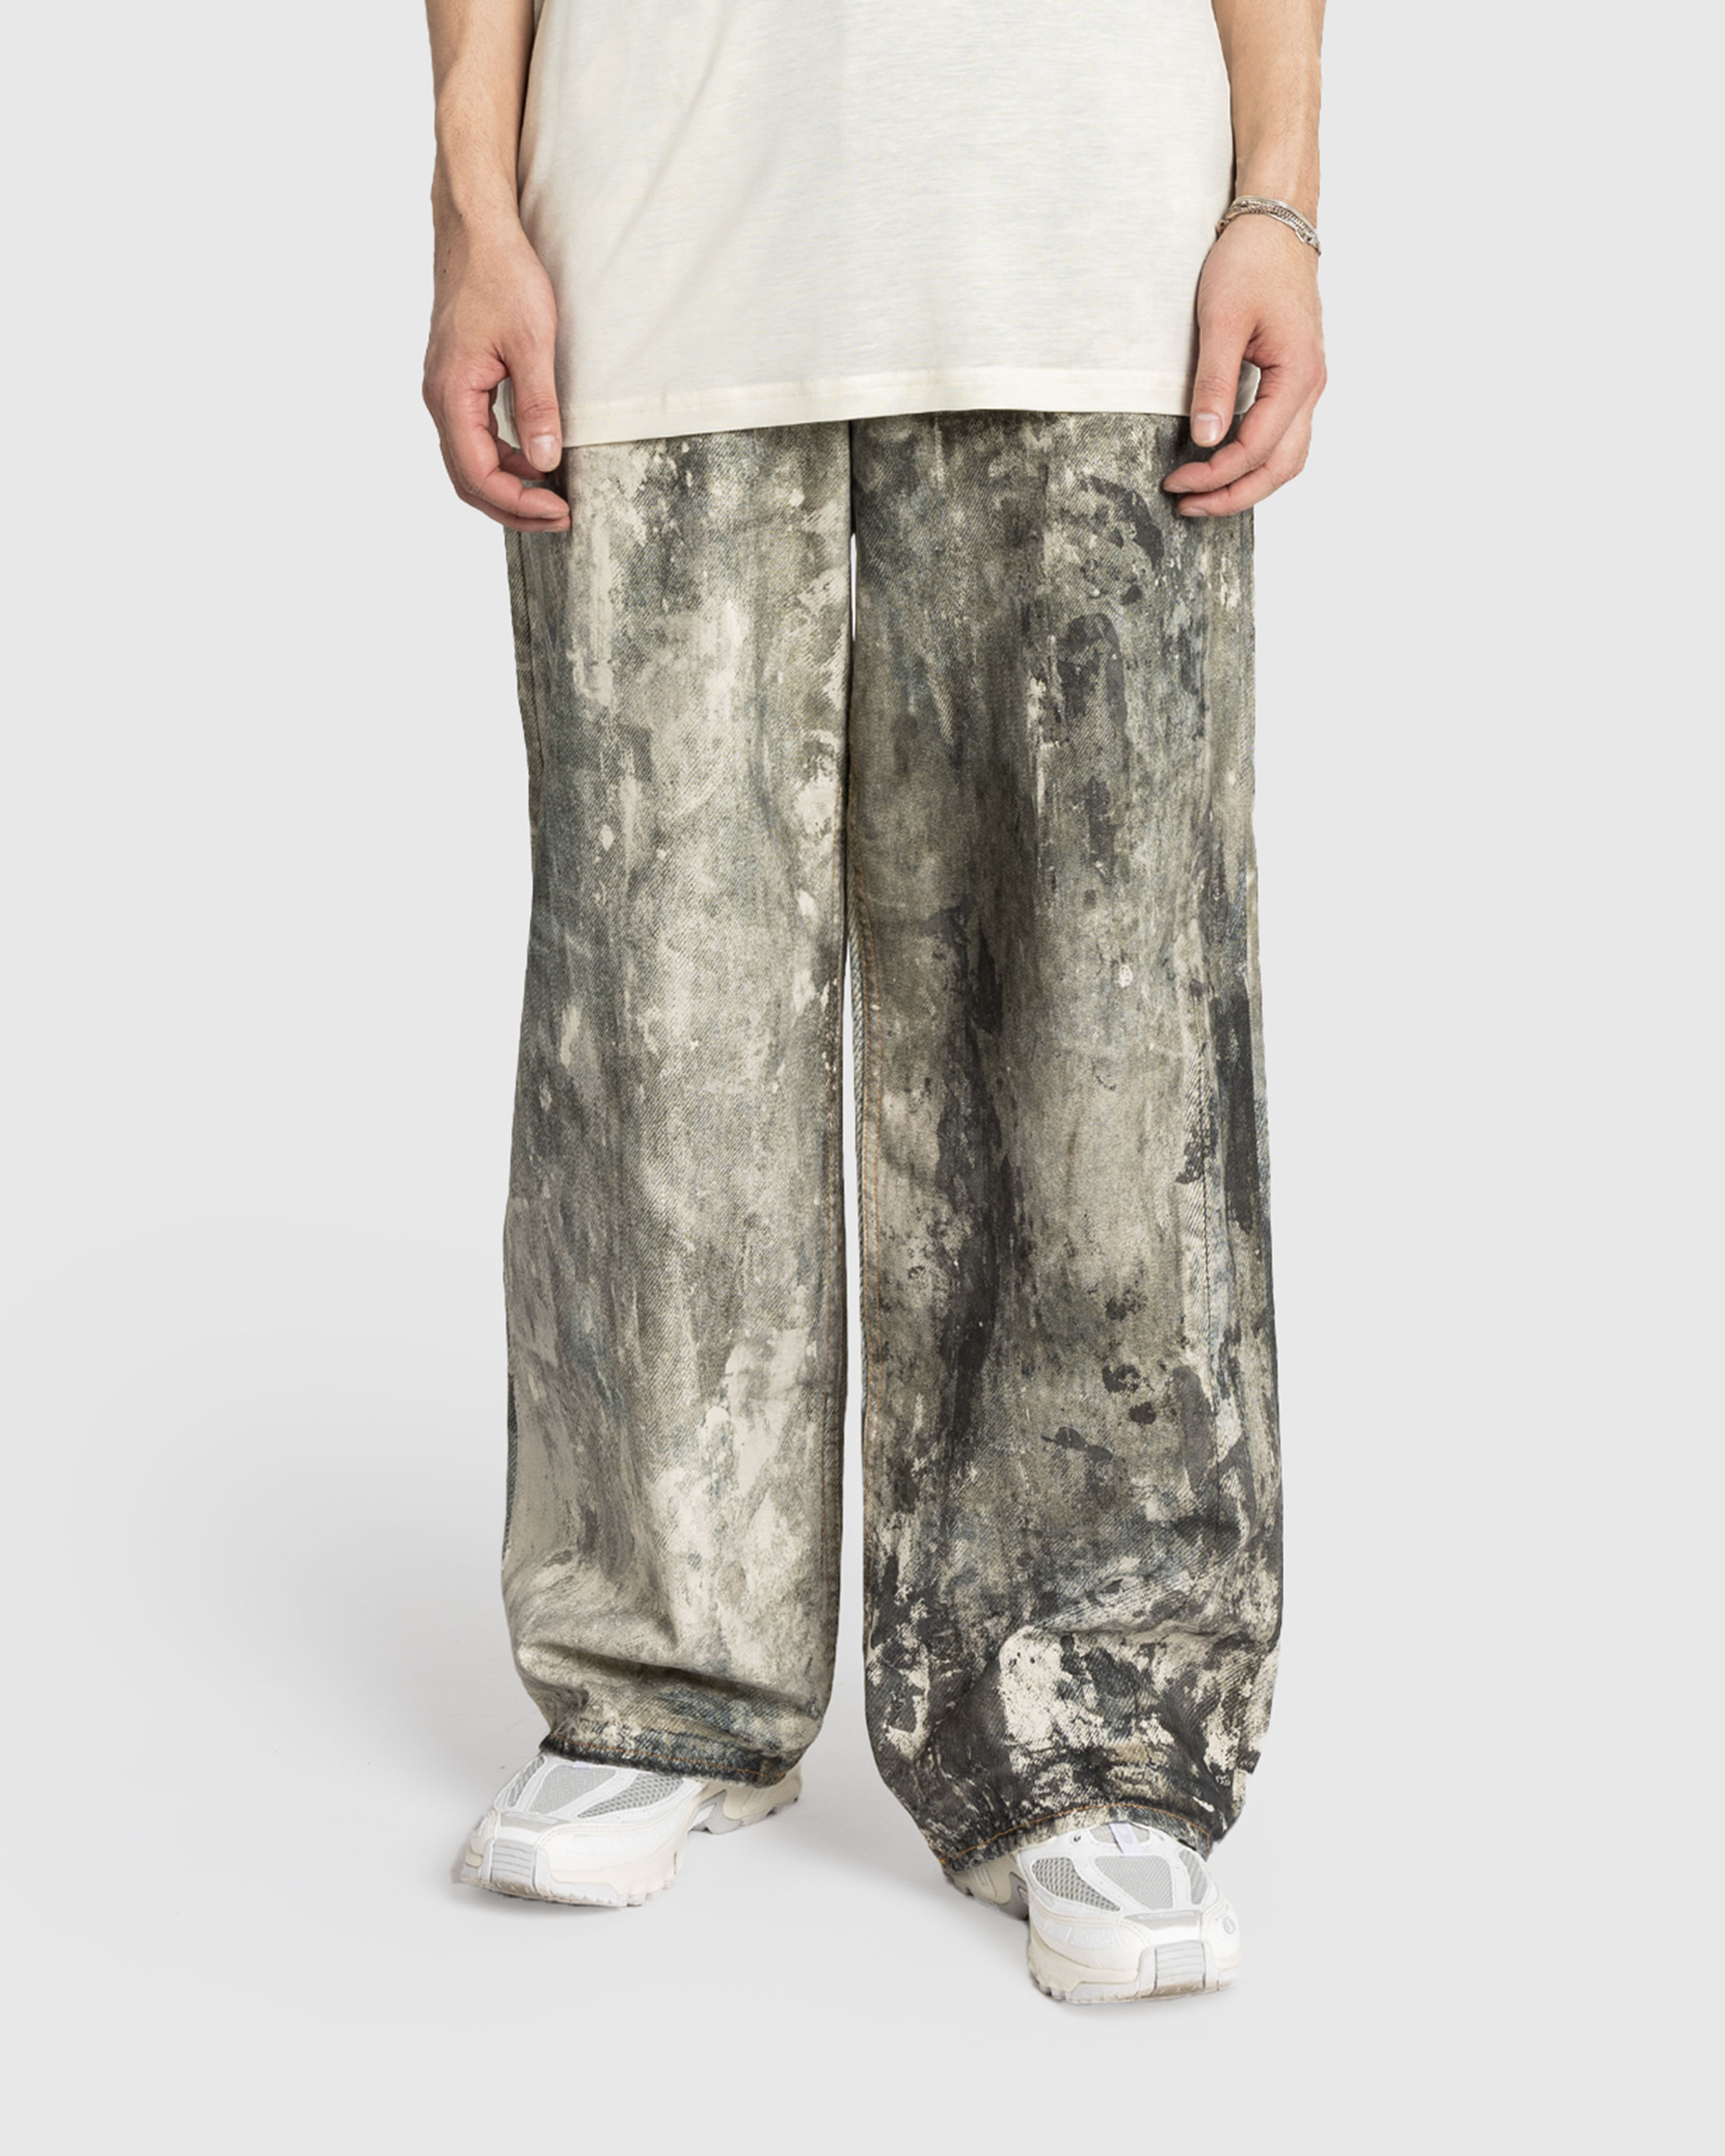 Acne Studios – Loose Fit Trousers 1981M Cold Grey - Pants - Grey - Image 2